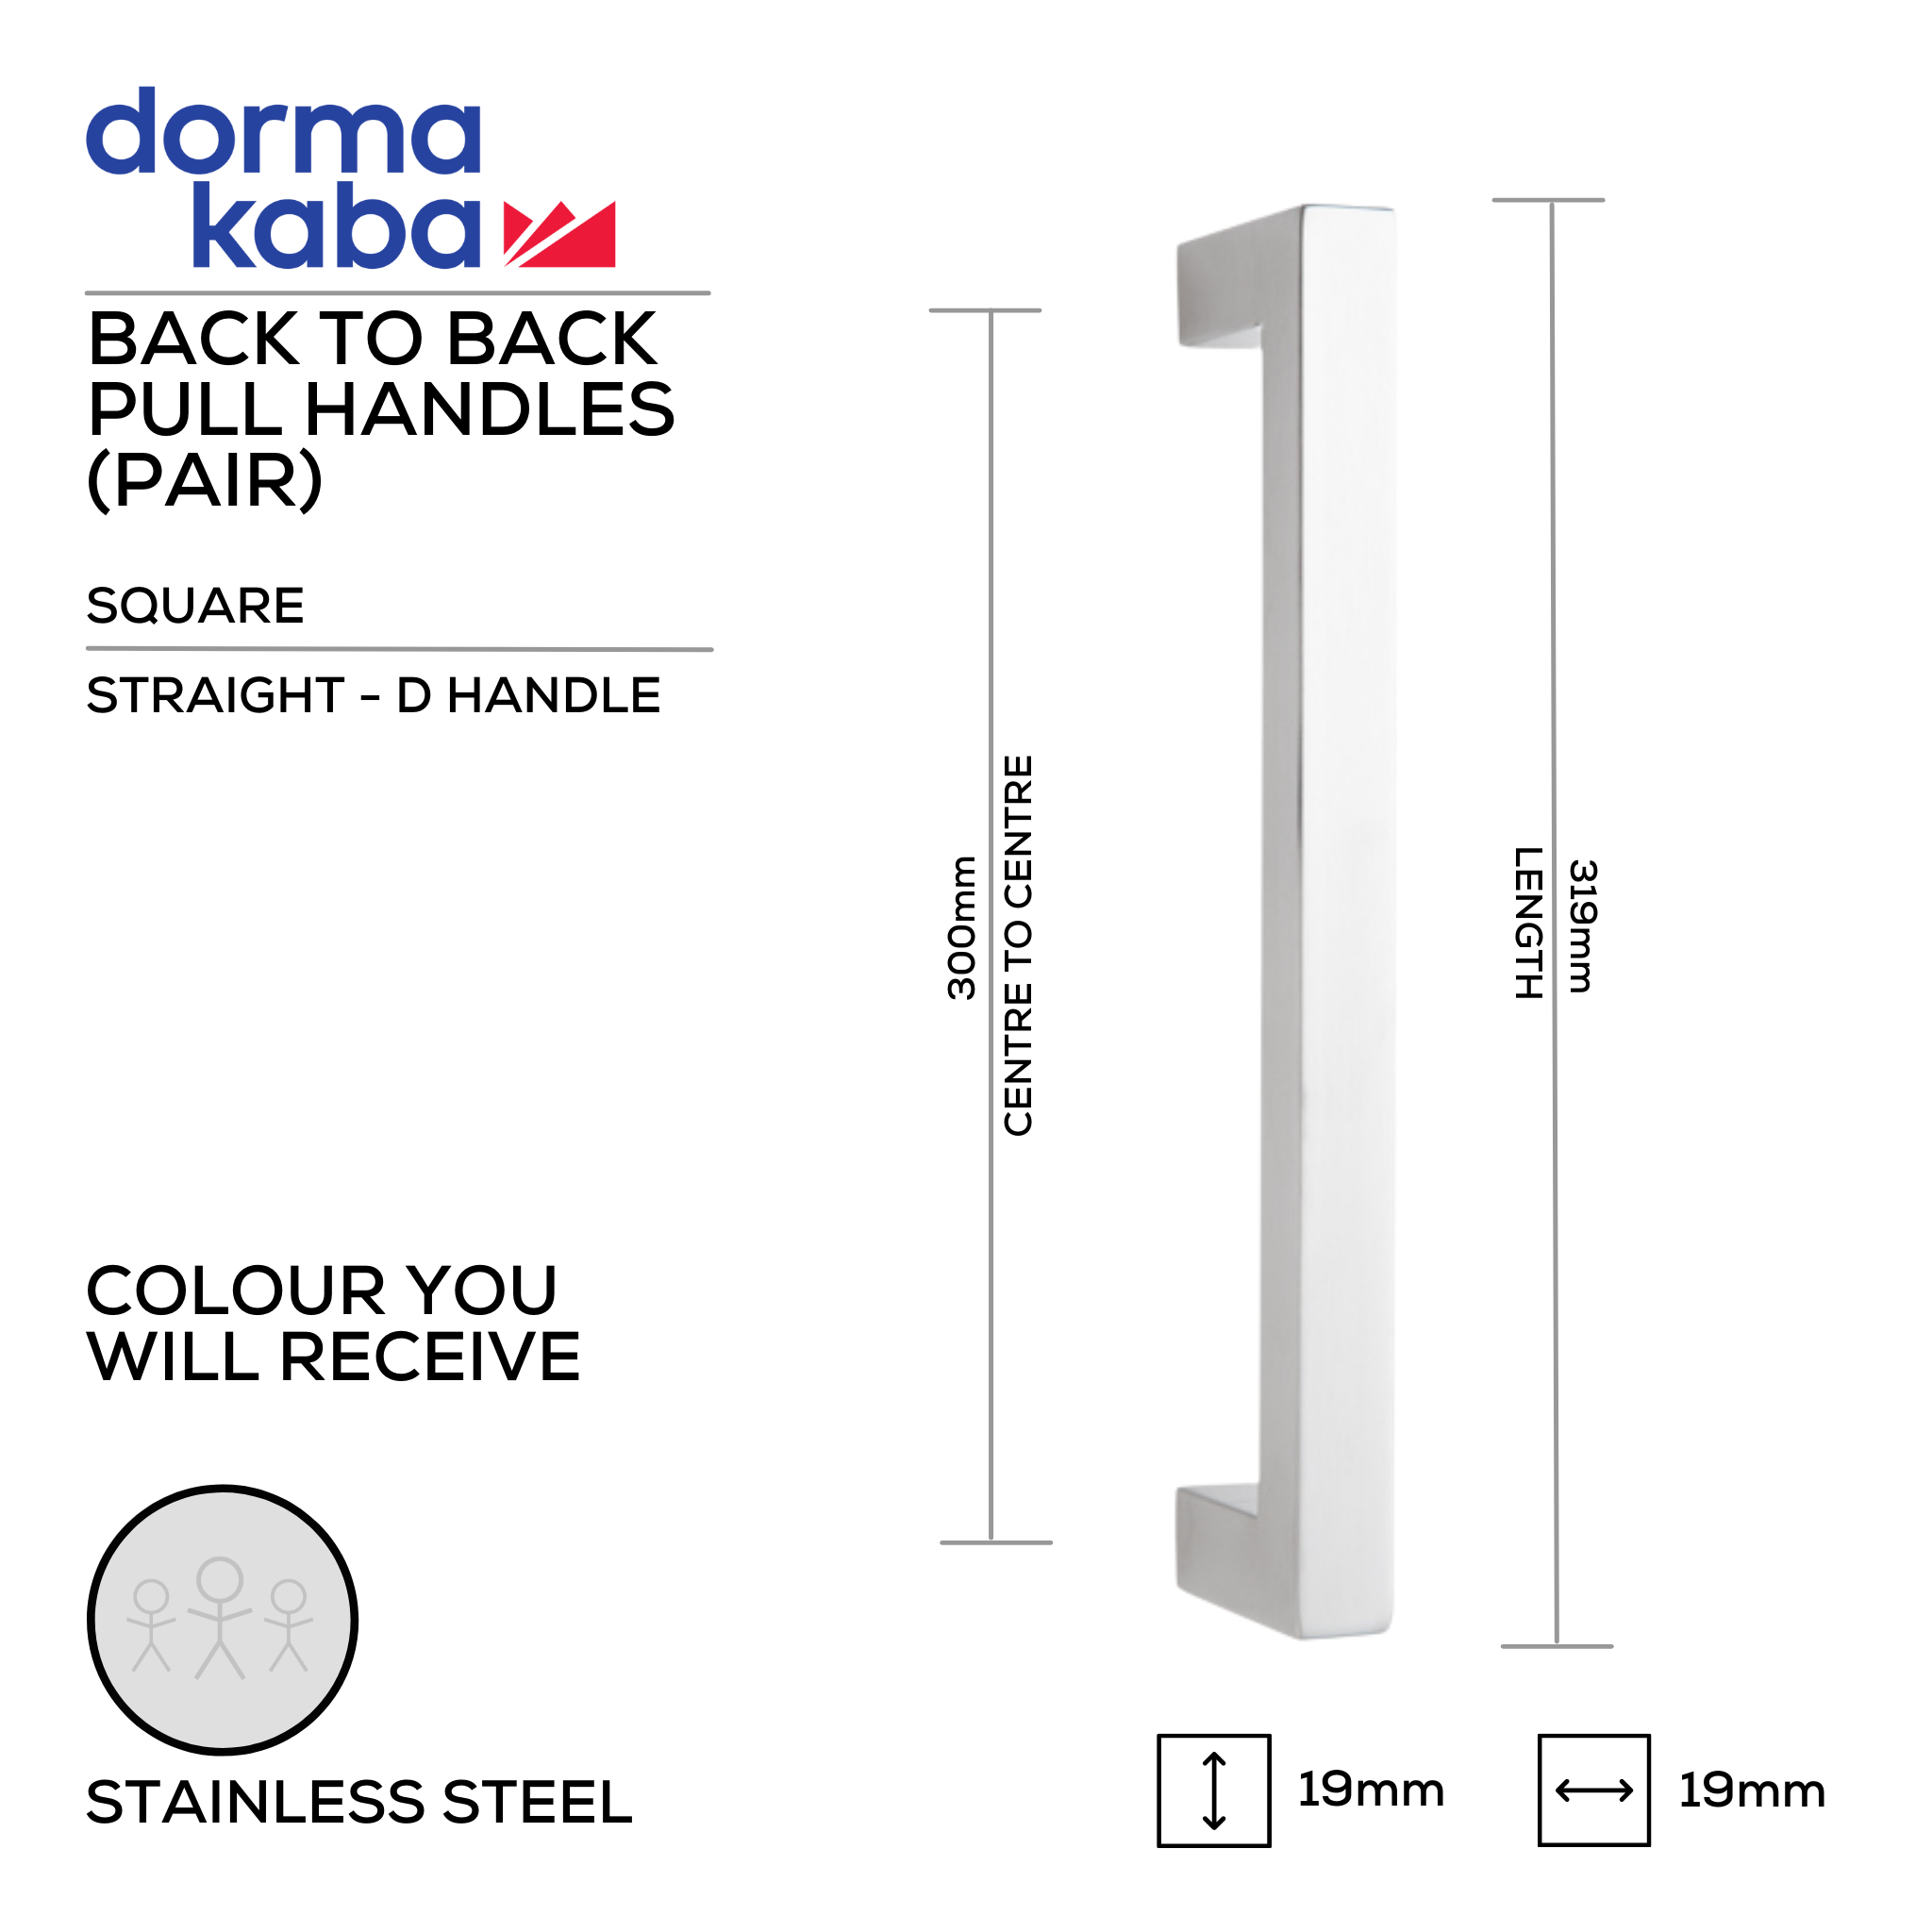 DSQ 06H 300 BTB, Pull Handle, Square, Straight, D Handle, BTB, 19mm (d) x 319mm (l) x 300mm (ctc), Stainless Steel, DORMAKABA